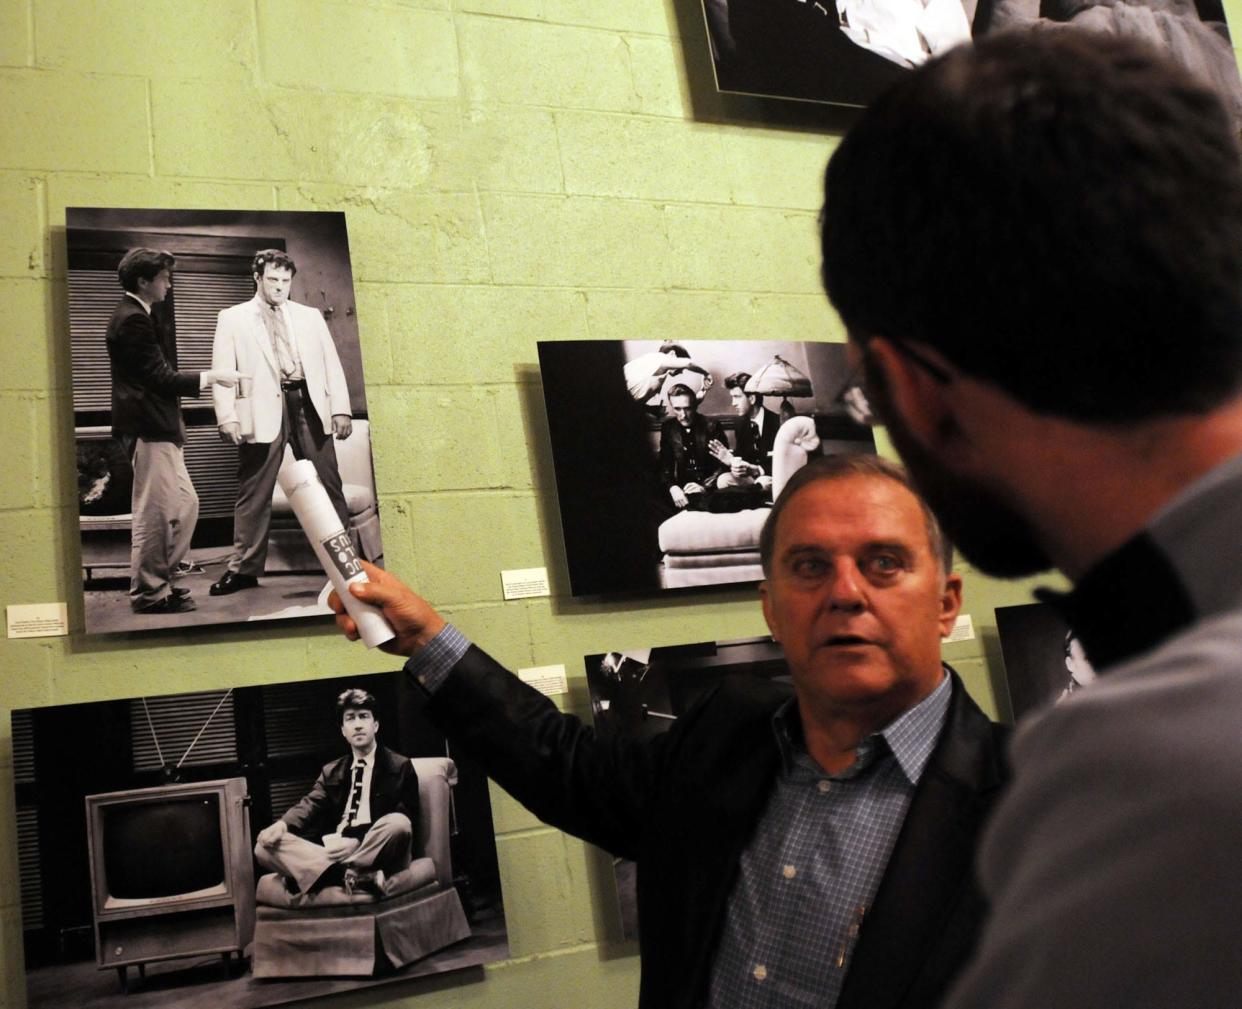 Fred Pickler, who played the "Yellow Man" in Blue Velvet, looks at the photographs by filmmaker Peter Braatz at the opening of an exhibition celebrating the 25th anniversary of Blue Velvet in Dennis Hopper's old building in 2011.